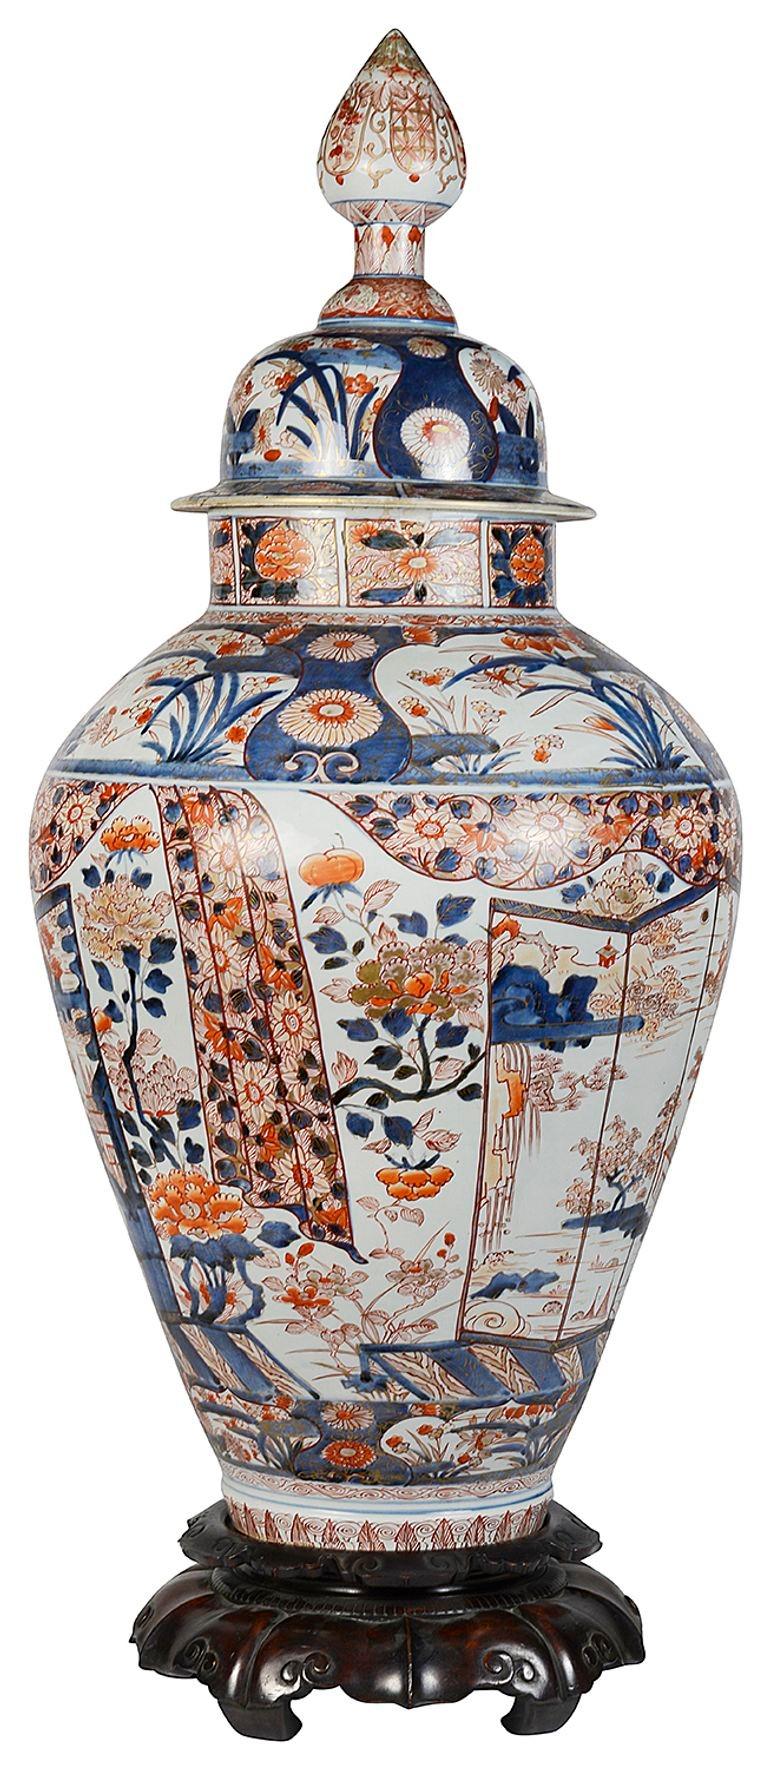 This wonderful large 18th Century Japanese Arita Imari lidded vase on stand. Having boarders of classical motif and foliate decoration, inset hand painted panels exotic plants and flowers, also a four fold screen with a lake and buildings. Mounted